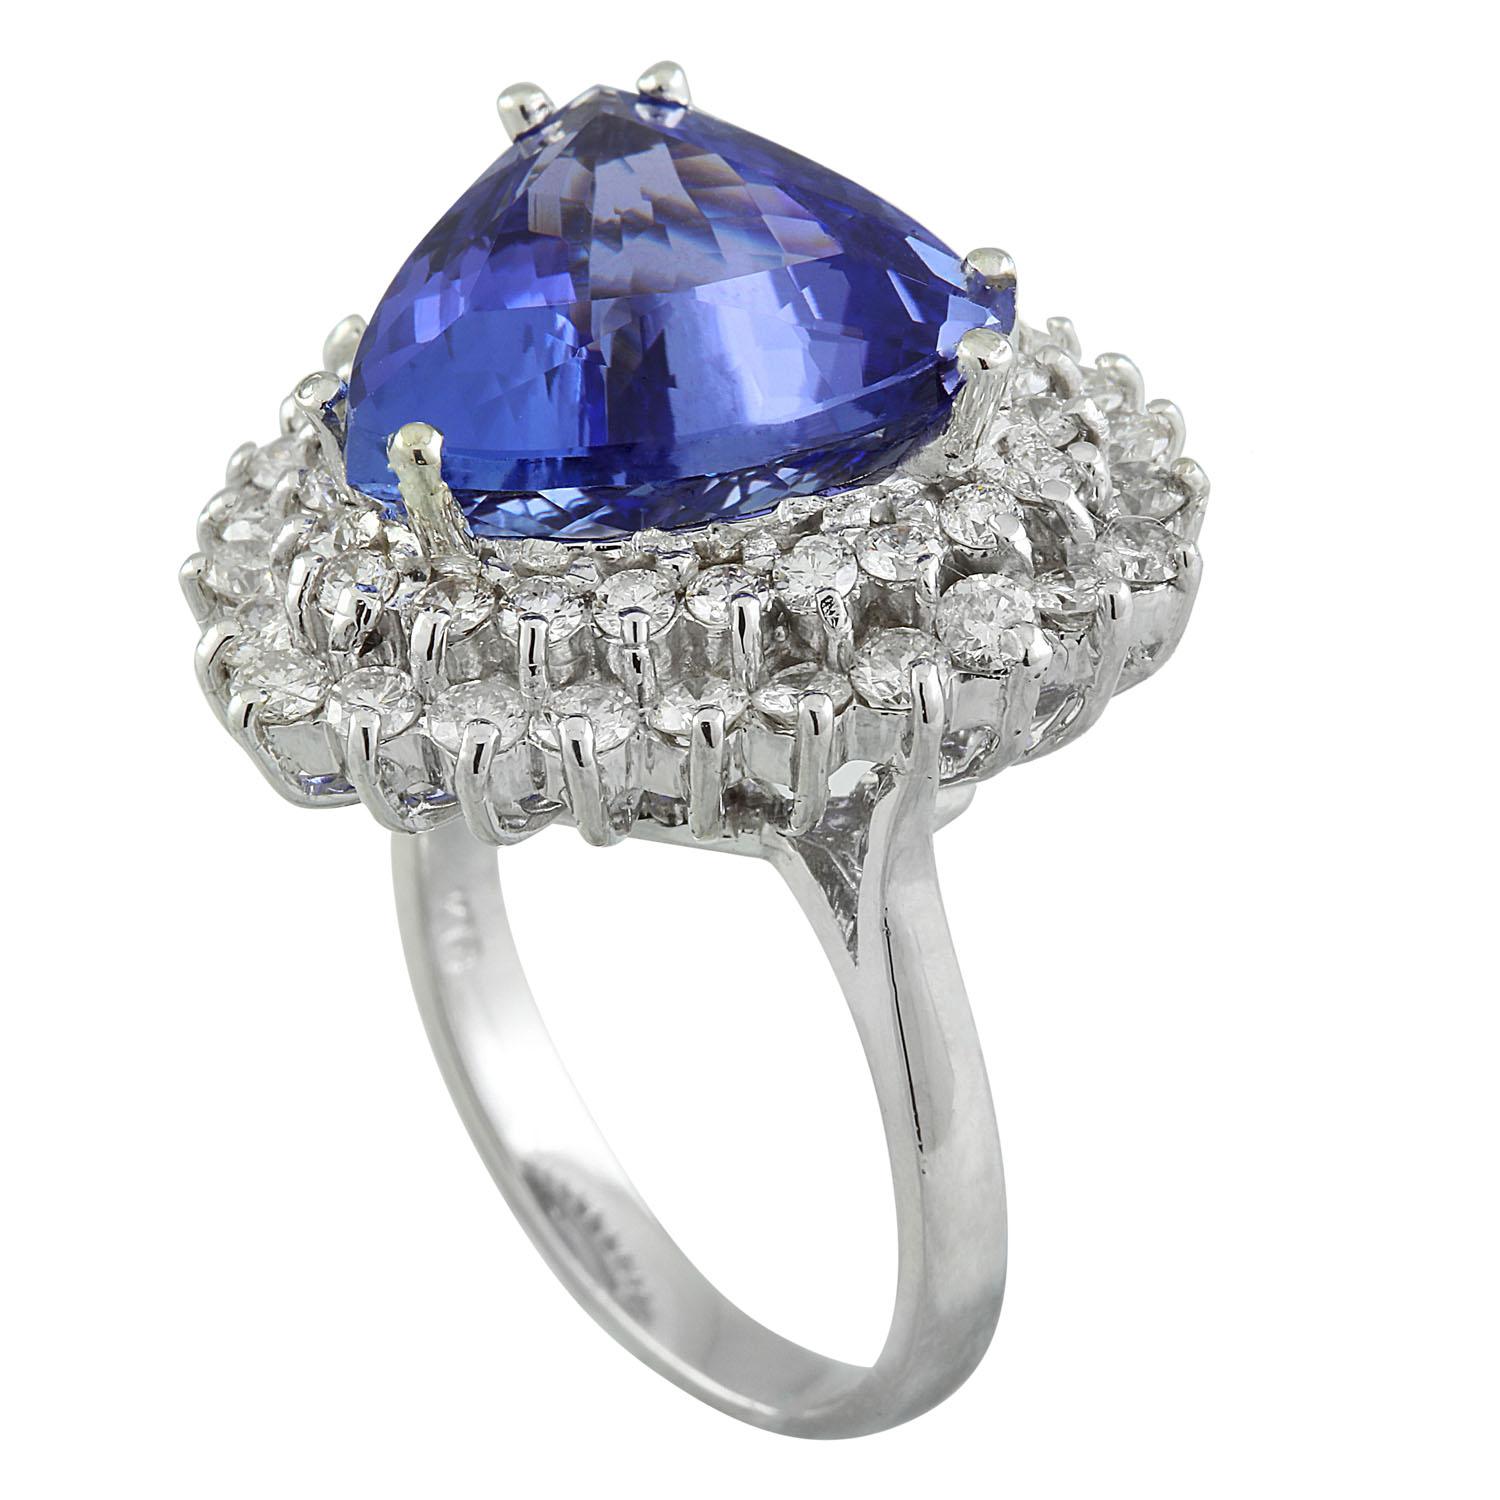 12.72Carat Natural Tanzanite 14 Karat Solid White Gold Diamond Ring In New Condition For Sale In Los Angeles, CA